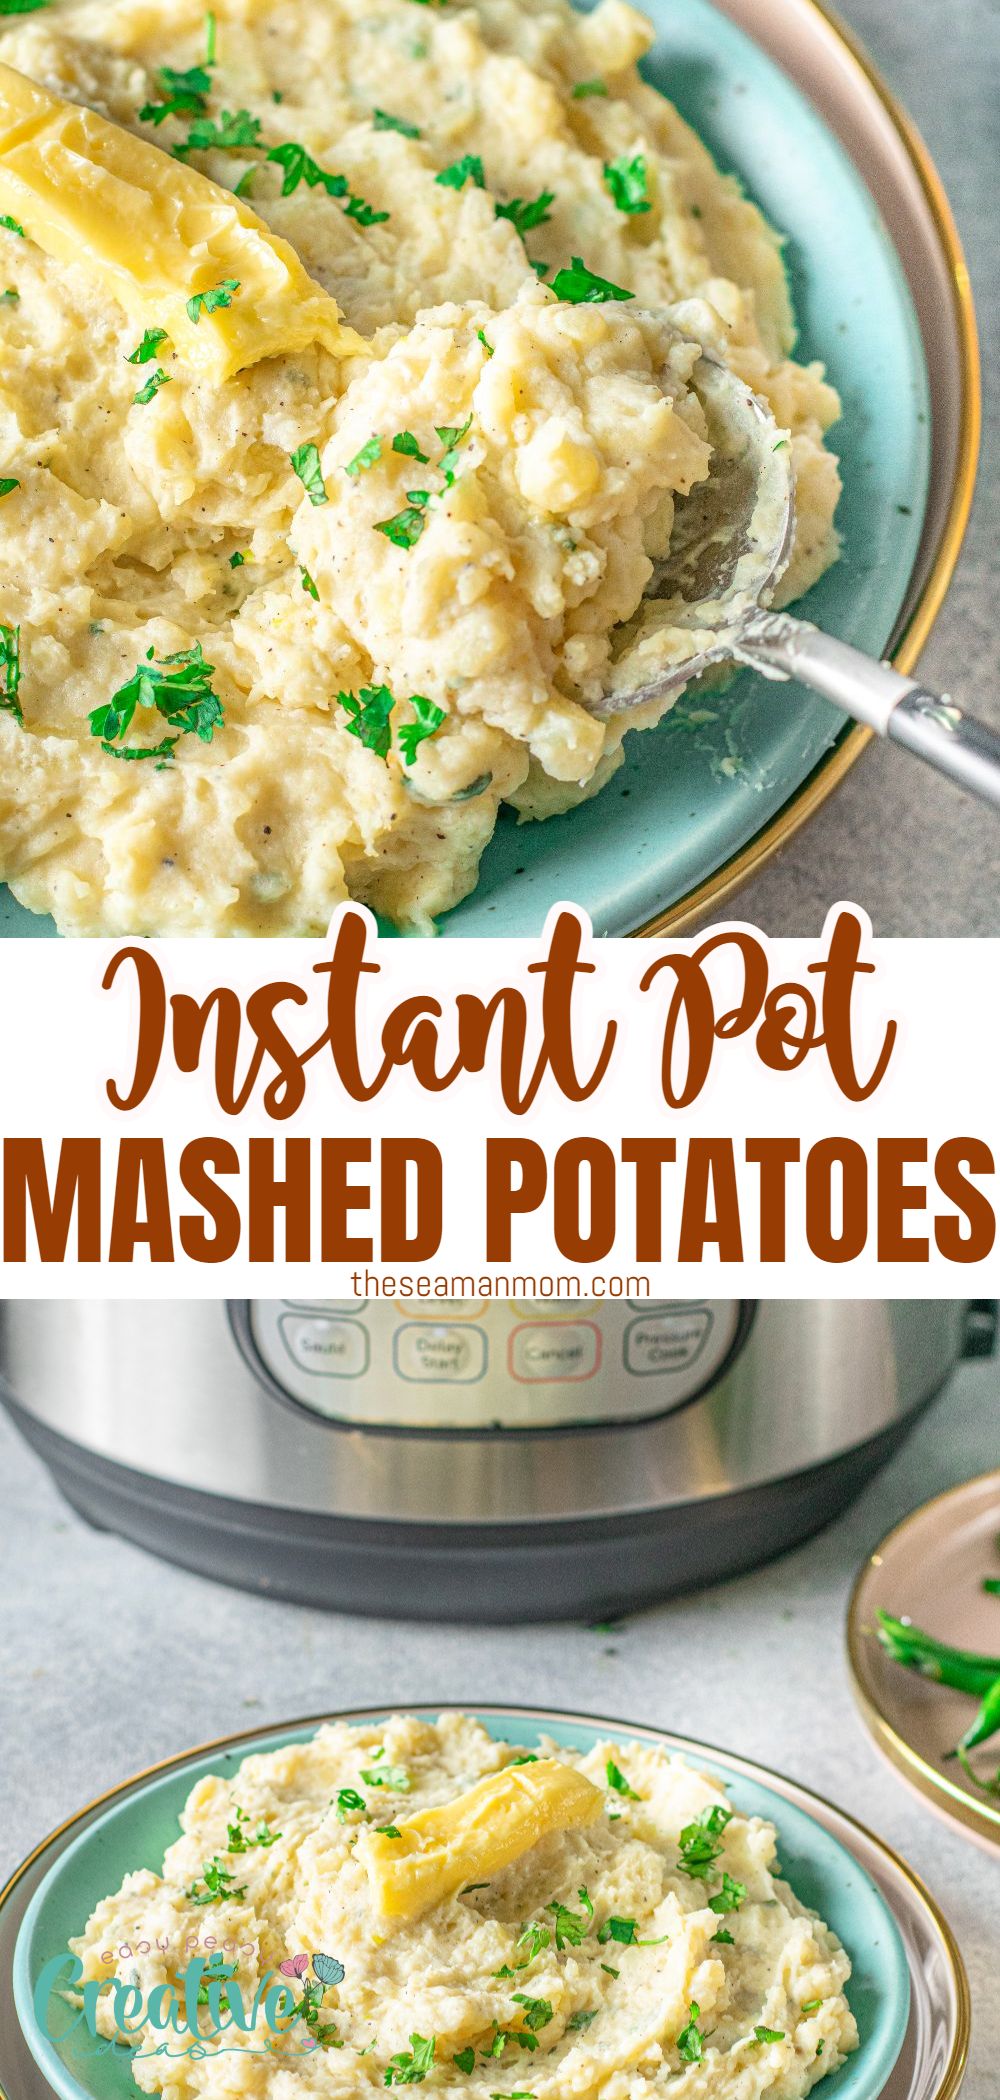 Are you looking for an easy way to make mashed potatoes? If so, then you need to try making them in the instant pot! Instant pot mashed potatoes are not only quick and easy to make, but they're also super delicious. Plus, they'll save you a ton of time since you won't have to boil the potatoes on the stovetop. So, if you're ready to learn how to make instant pot mashed potatoes, then read on! via @petroneagu